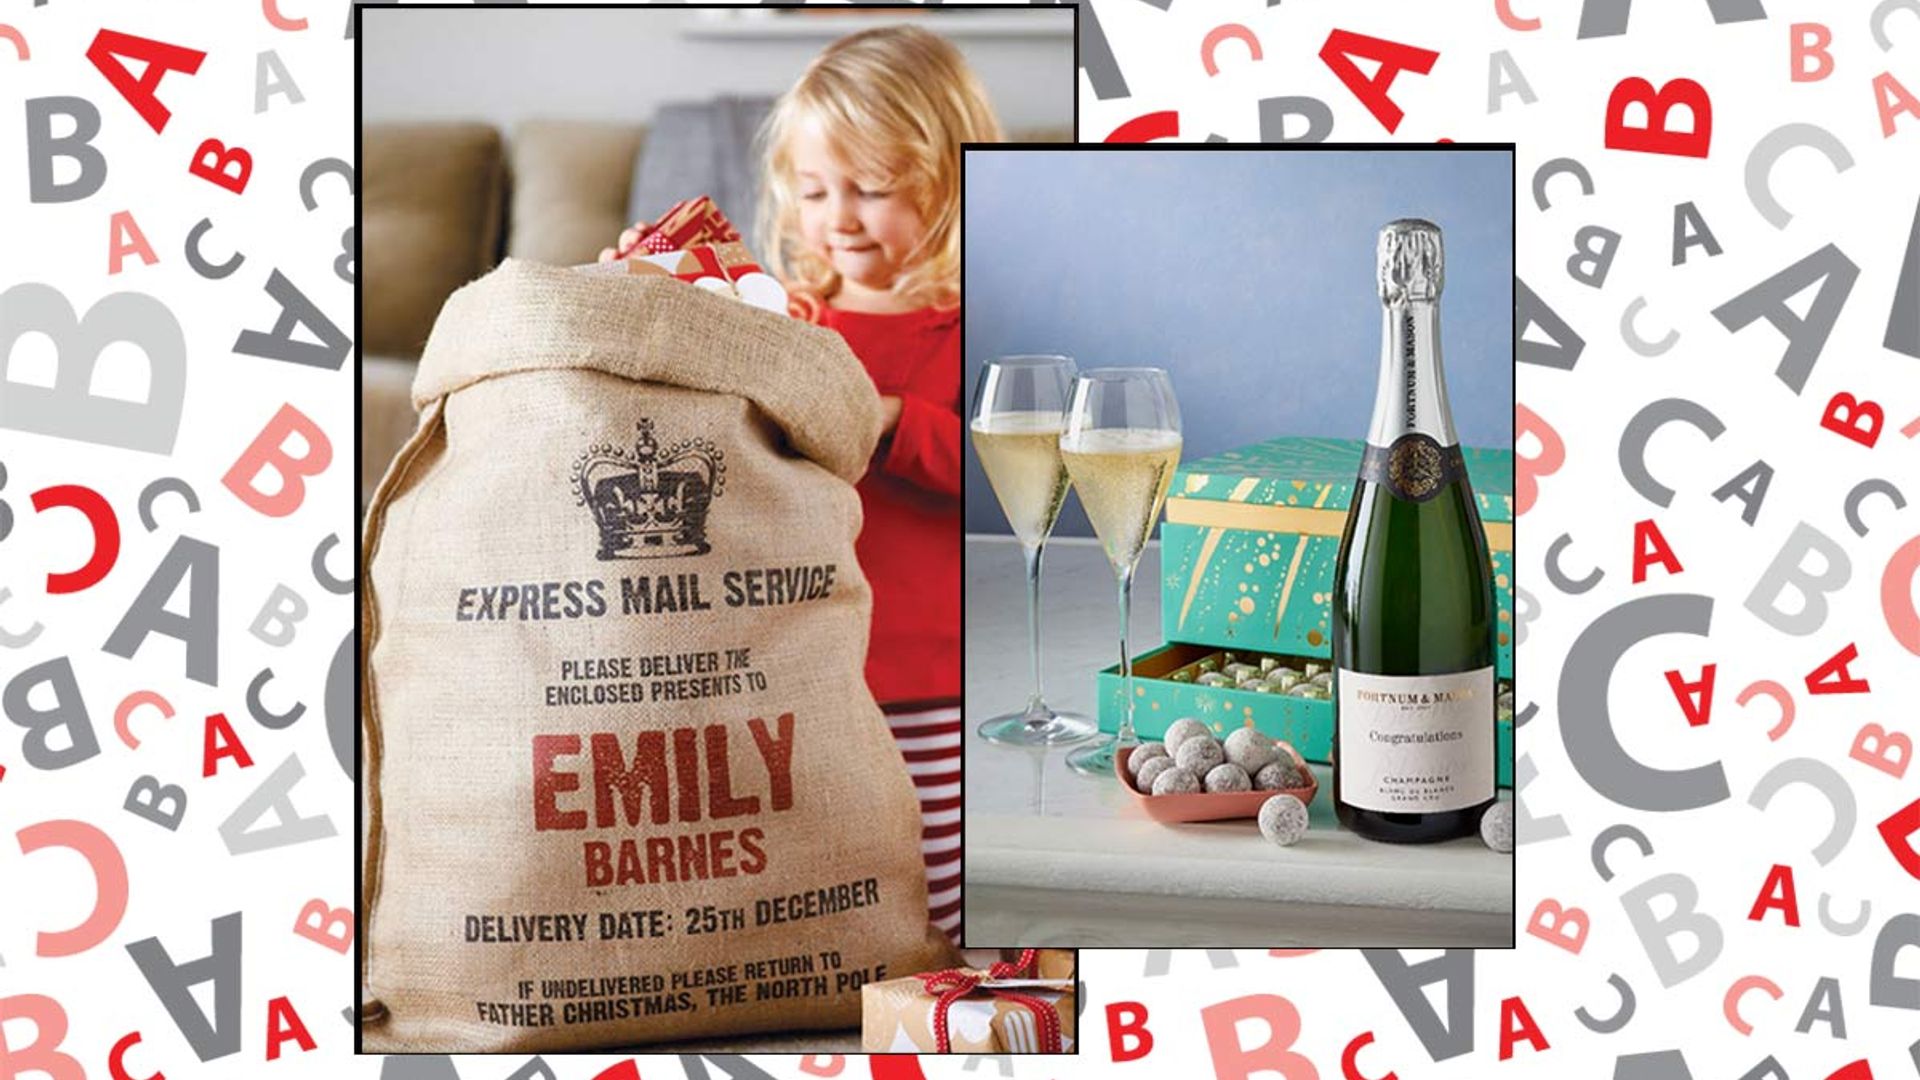 26 best personalised gift ideas because you just can't beat a gift with your name on it